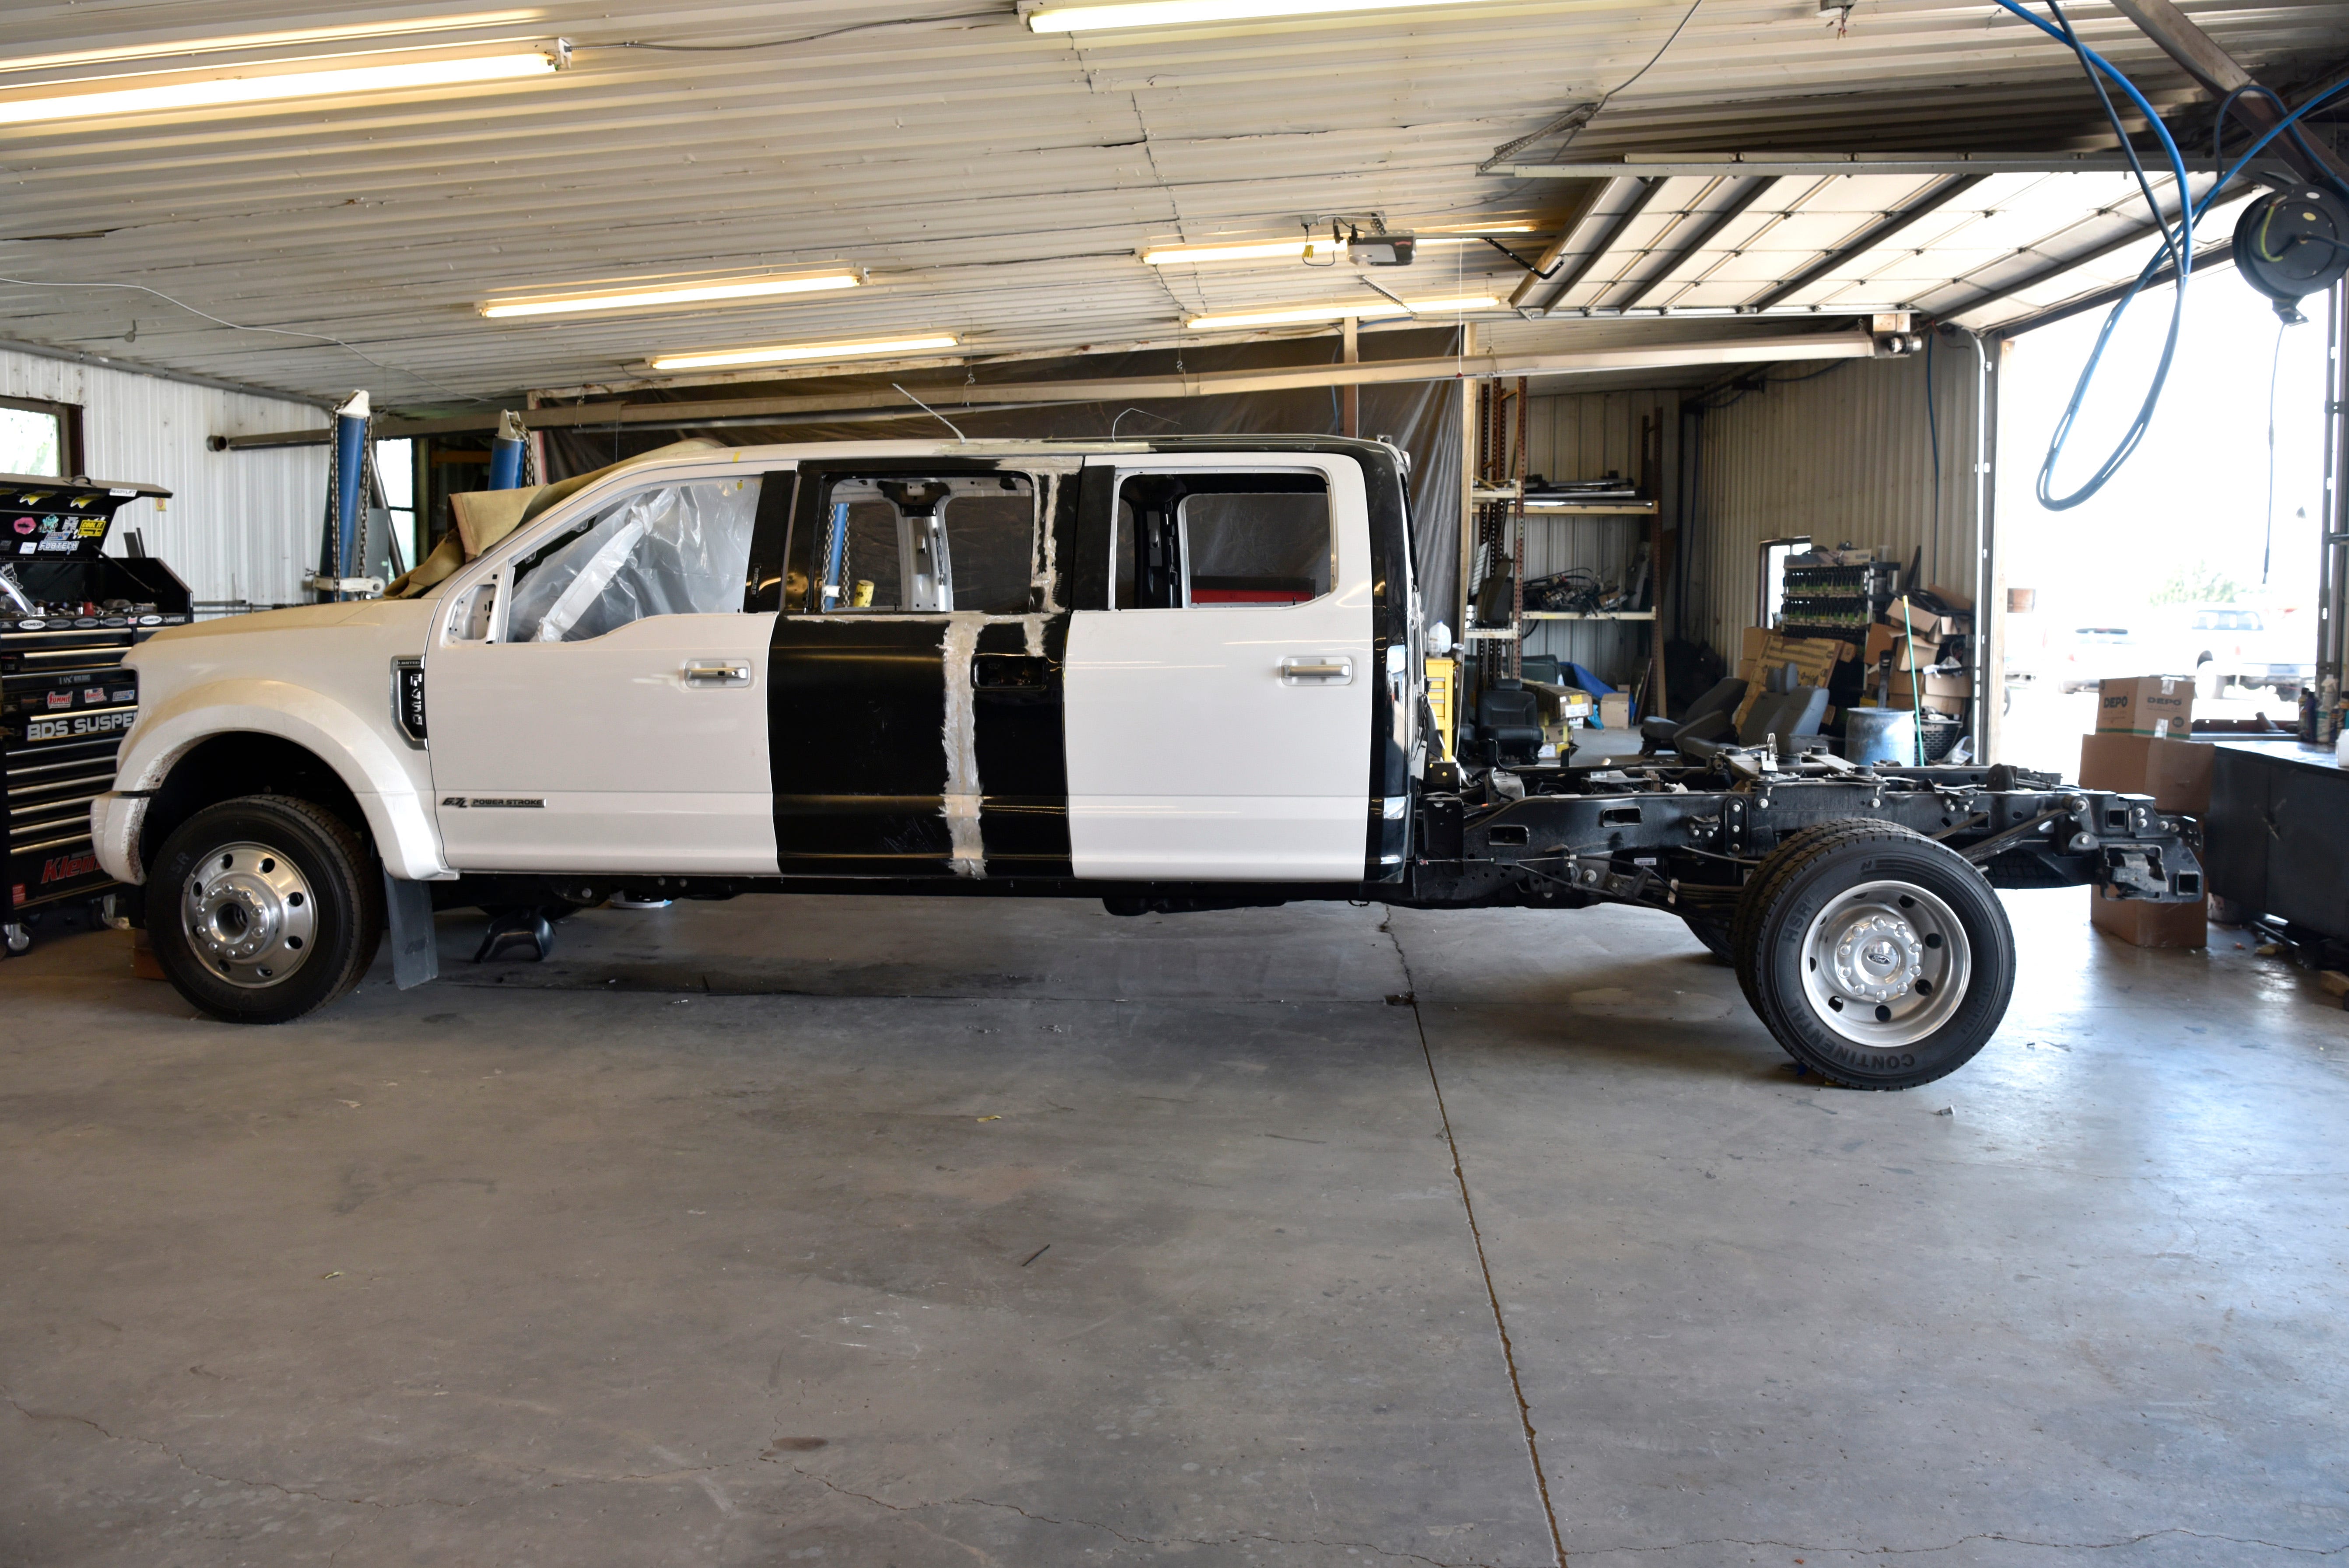 A custom six door Ford Excursion waits to be outfitted with a truck bed.